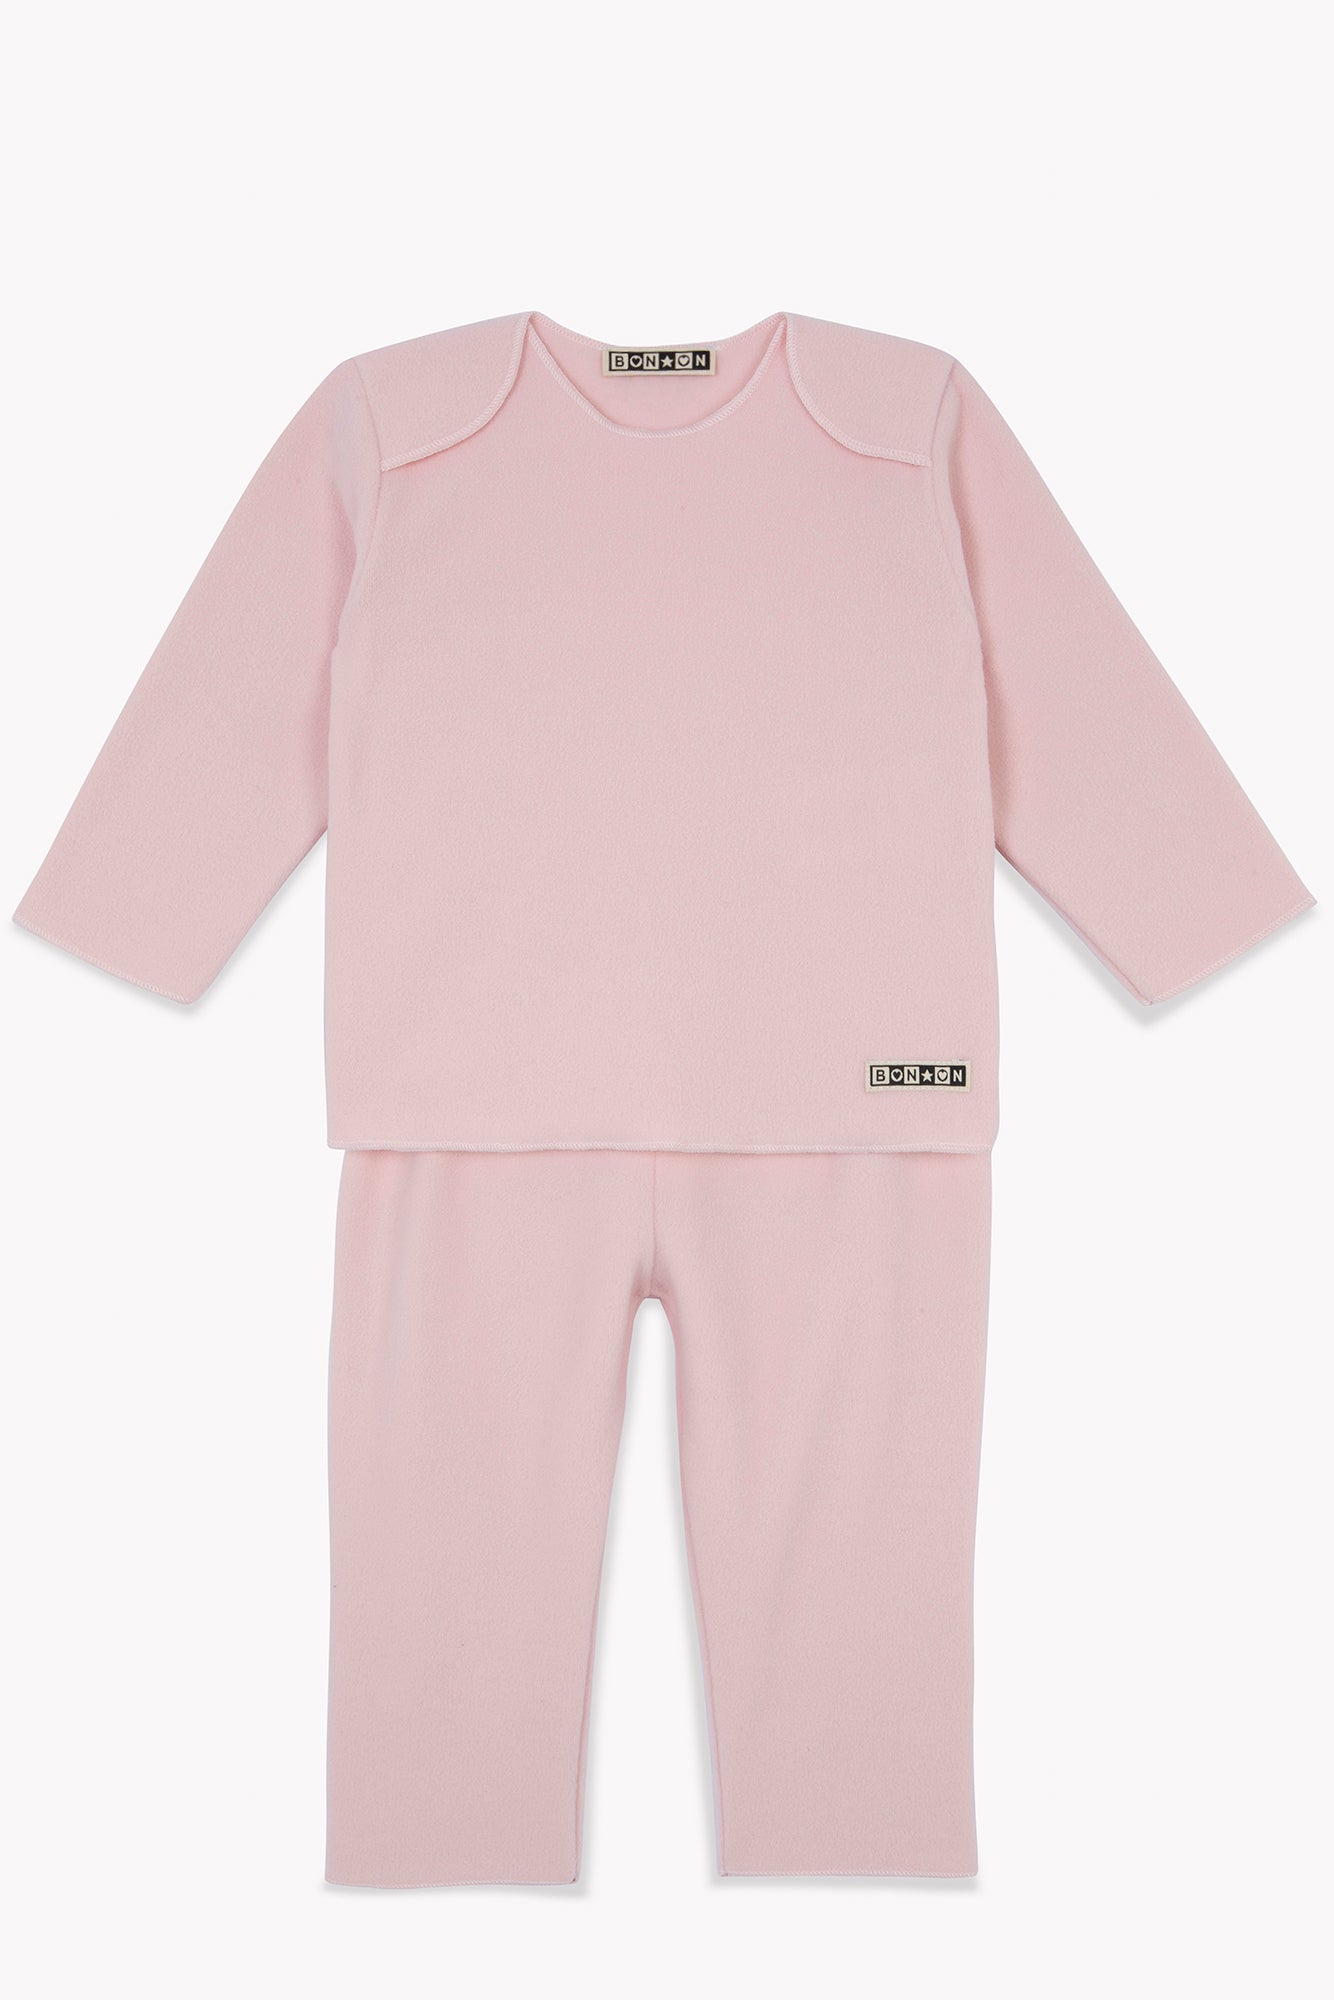 Outfit - Pink Baby in fine fleece